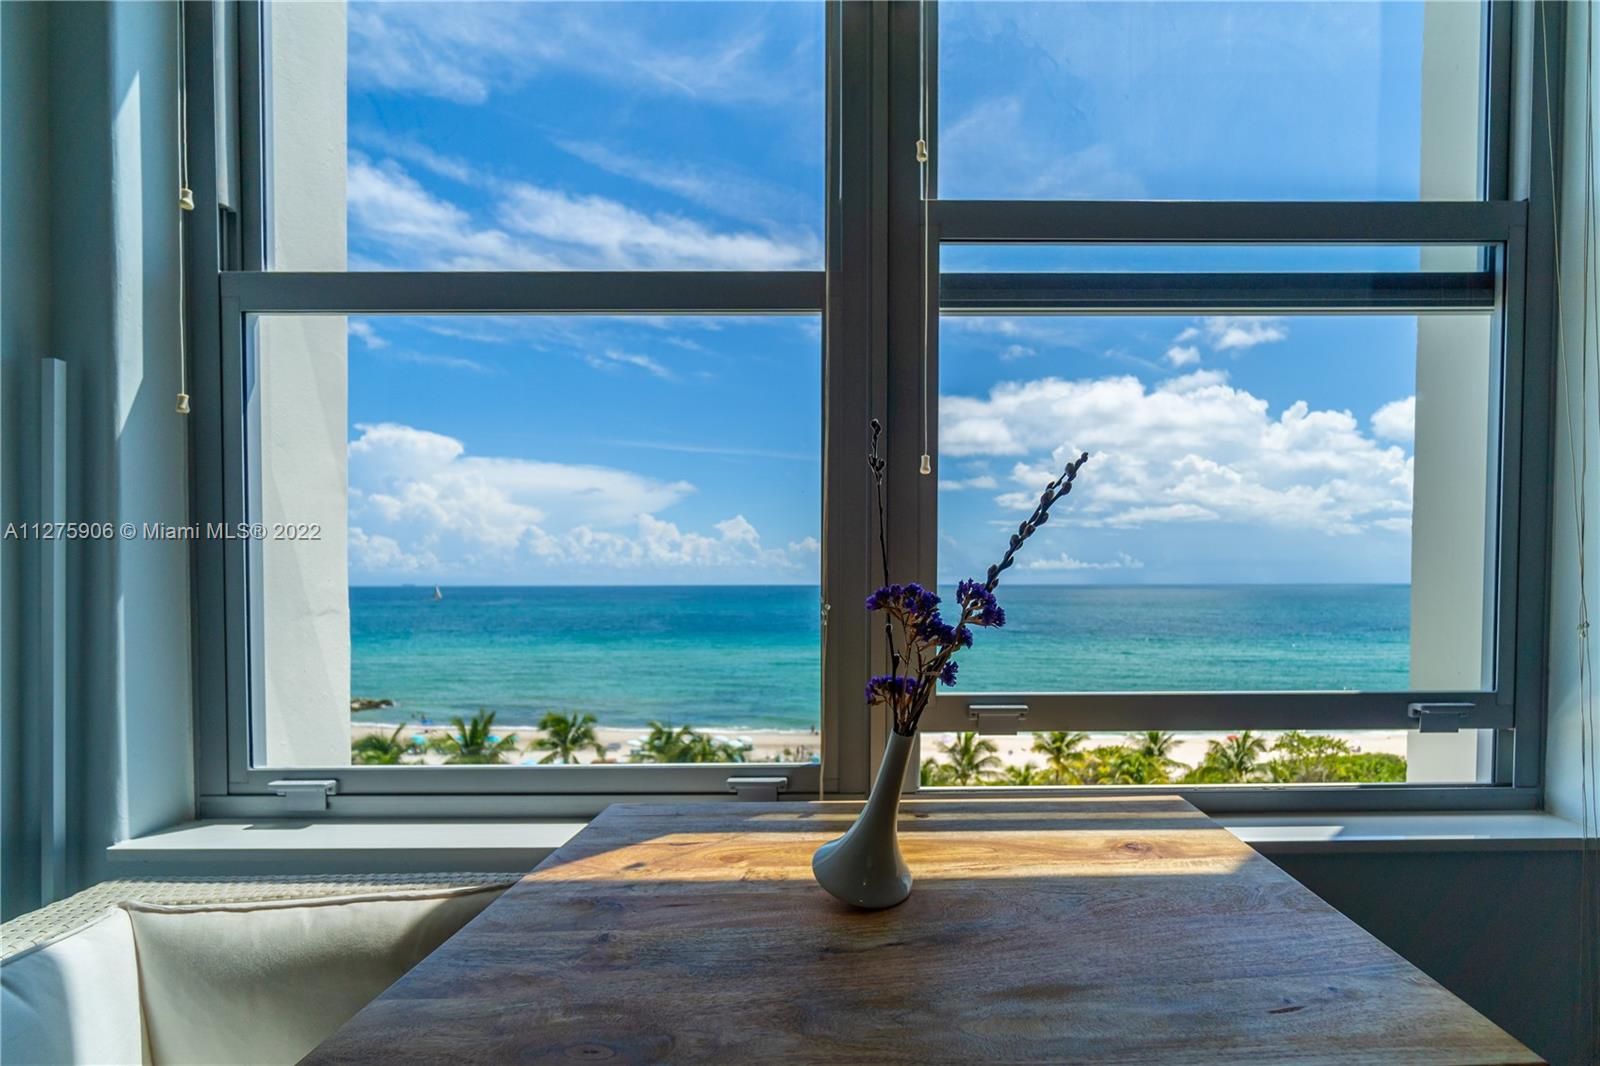 Cozy apartment with direct ocean views located in the heart of the Faena District & adjacent to the 